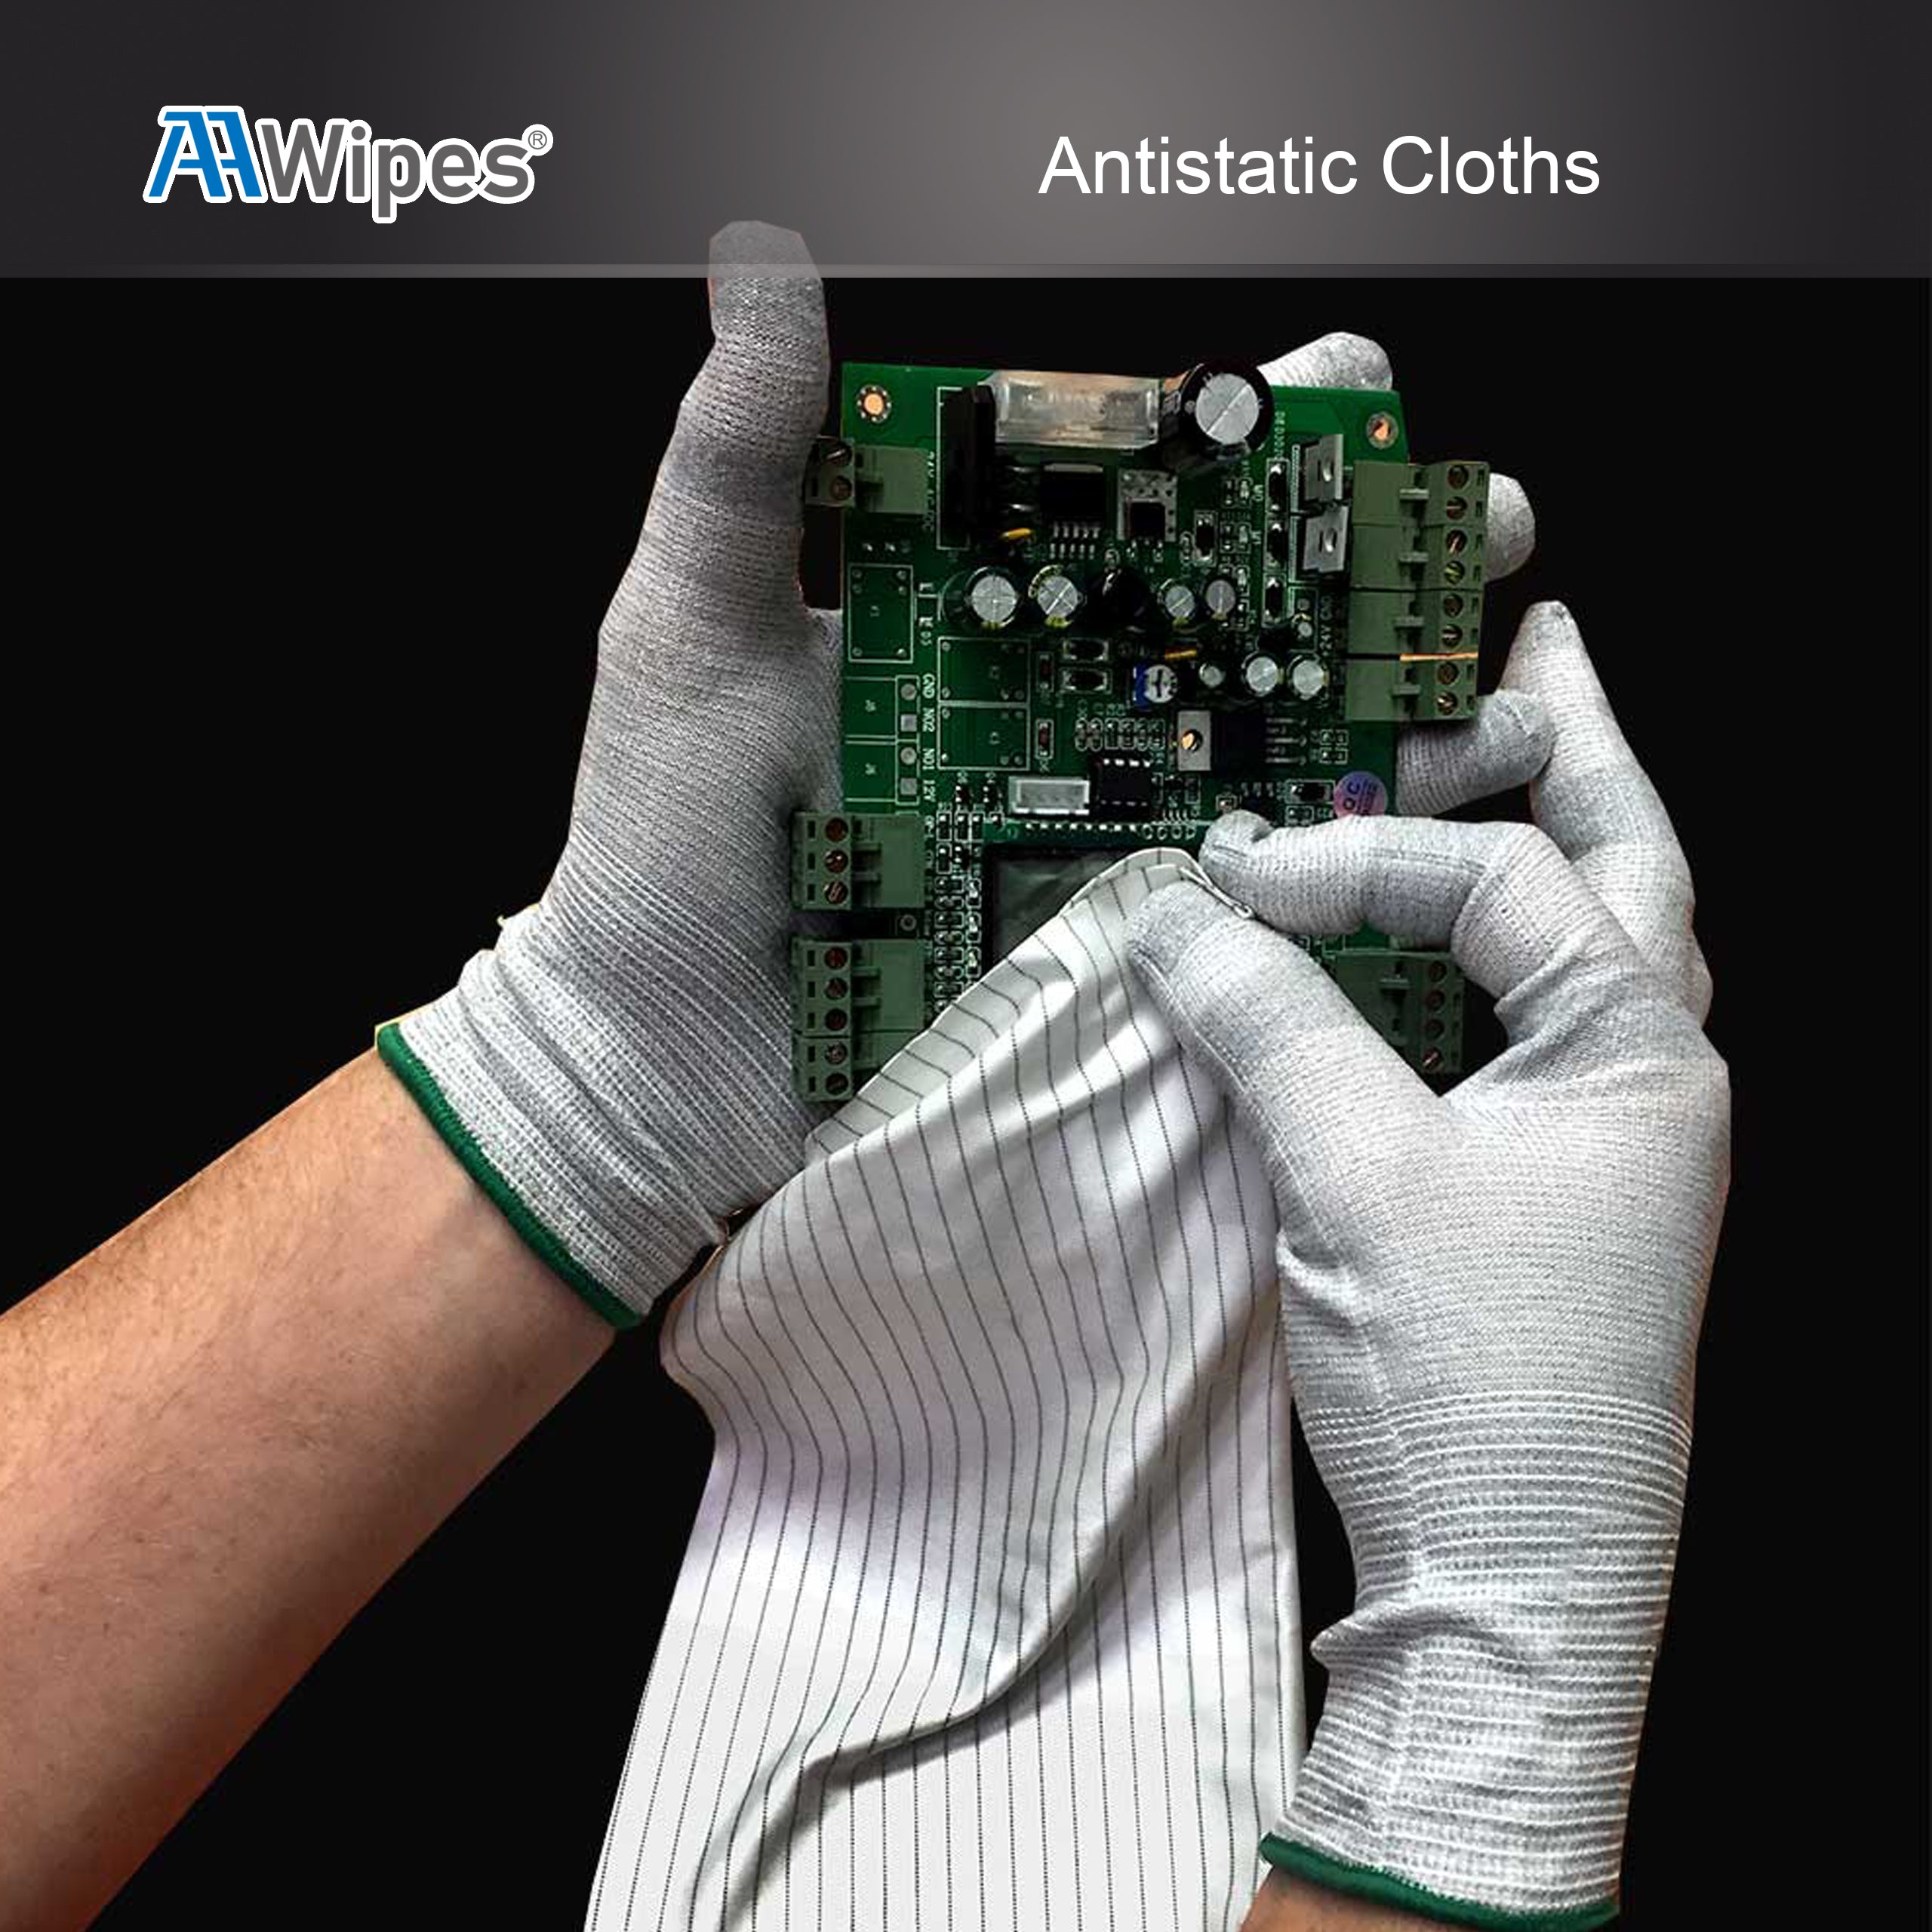 Anti-Static Electrostatic Discharge (ESD) Wipes (6"x6",100pcs, Polyester Wiper Cloths with Conductive Yarn) ESD-Safer Cleanroom Wipers Lint Free Class 100 ISO 5. 4,000 Wipes/Box, 40 Bags (No. CE16006).